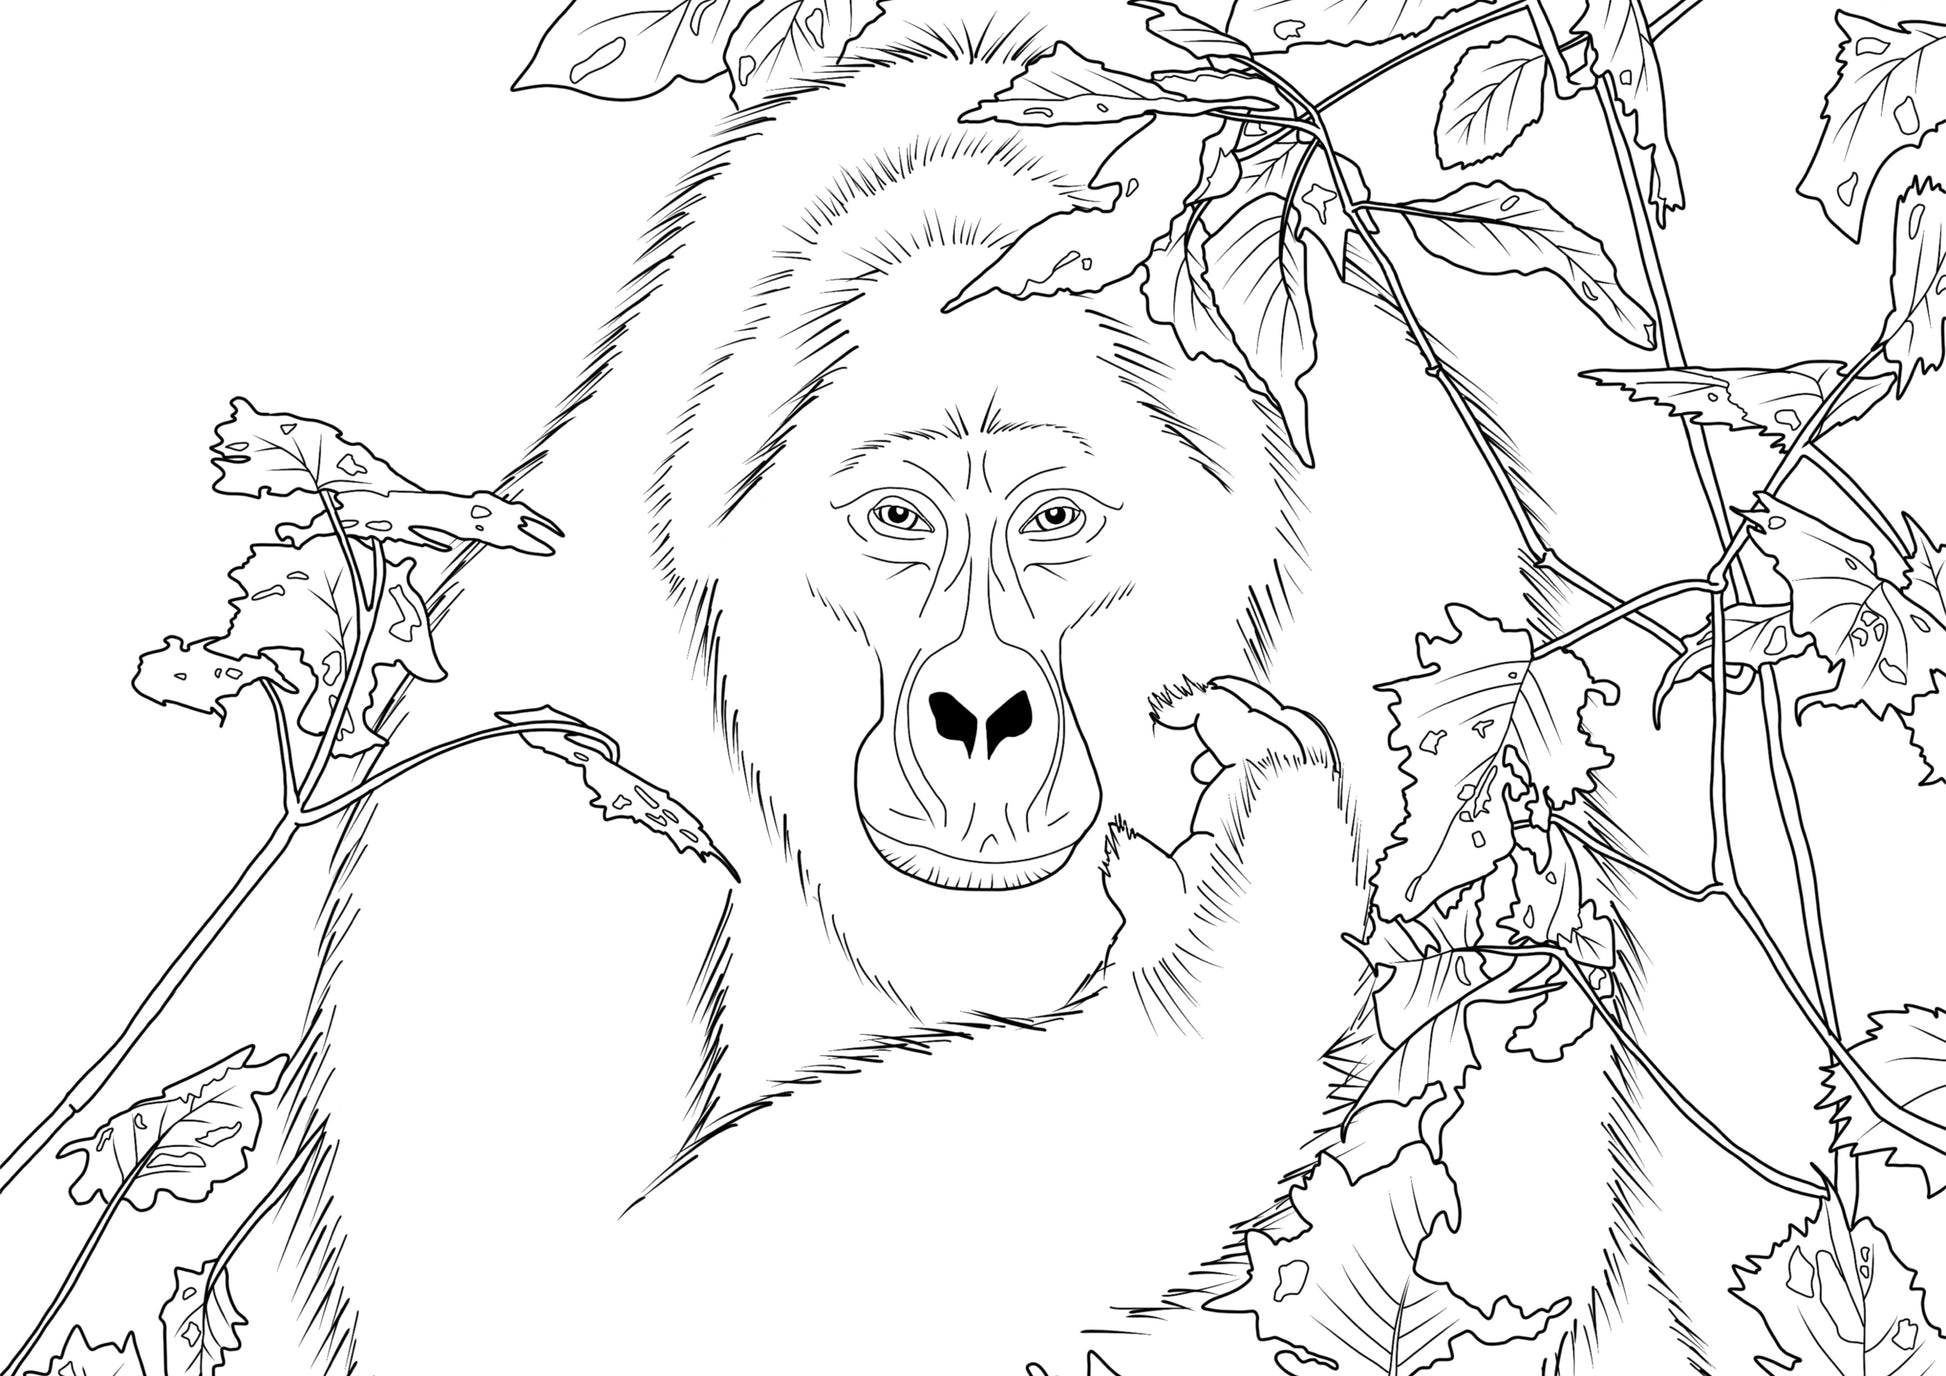 Line drawing of a silverback gorilla peering out through bug-eaten foliage in Bwindi Impenetrable Forest. The gorilla is calmly scratching his face with one hand and staring at the viewer with curiosity.